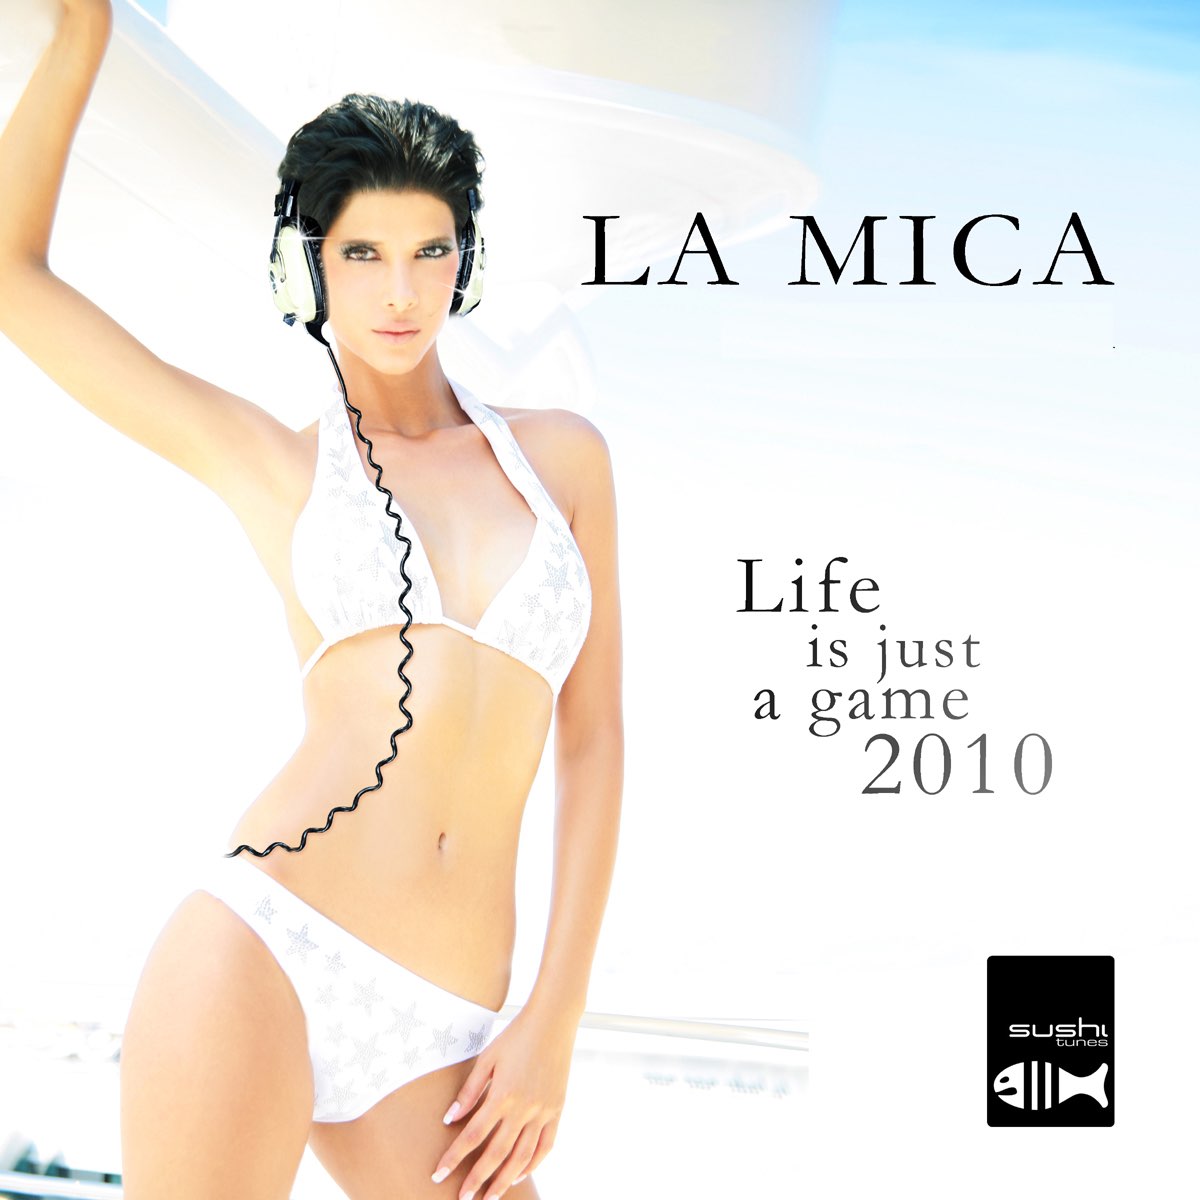 Just 2010. Mica Life. Life just a game. Feat Loona.